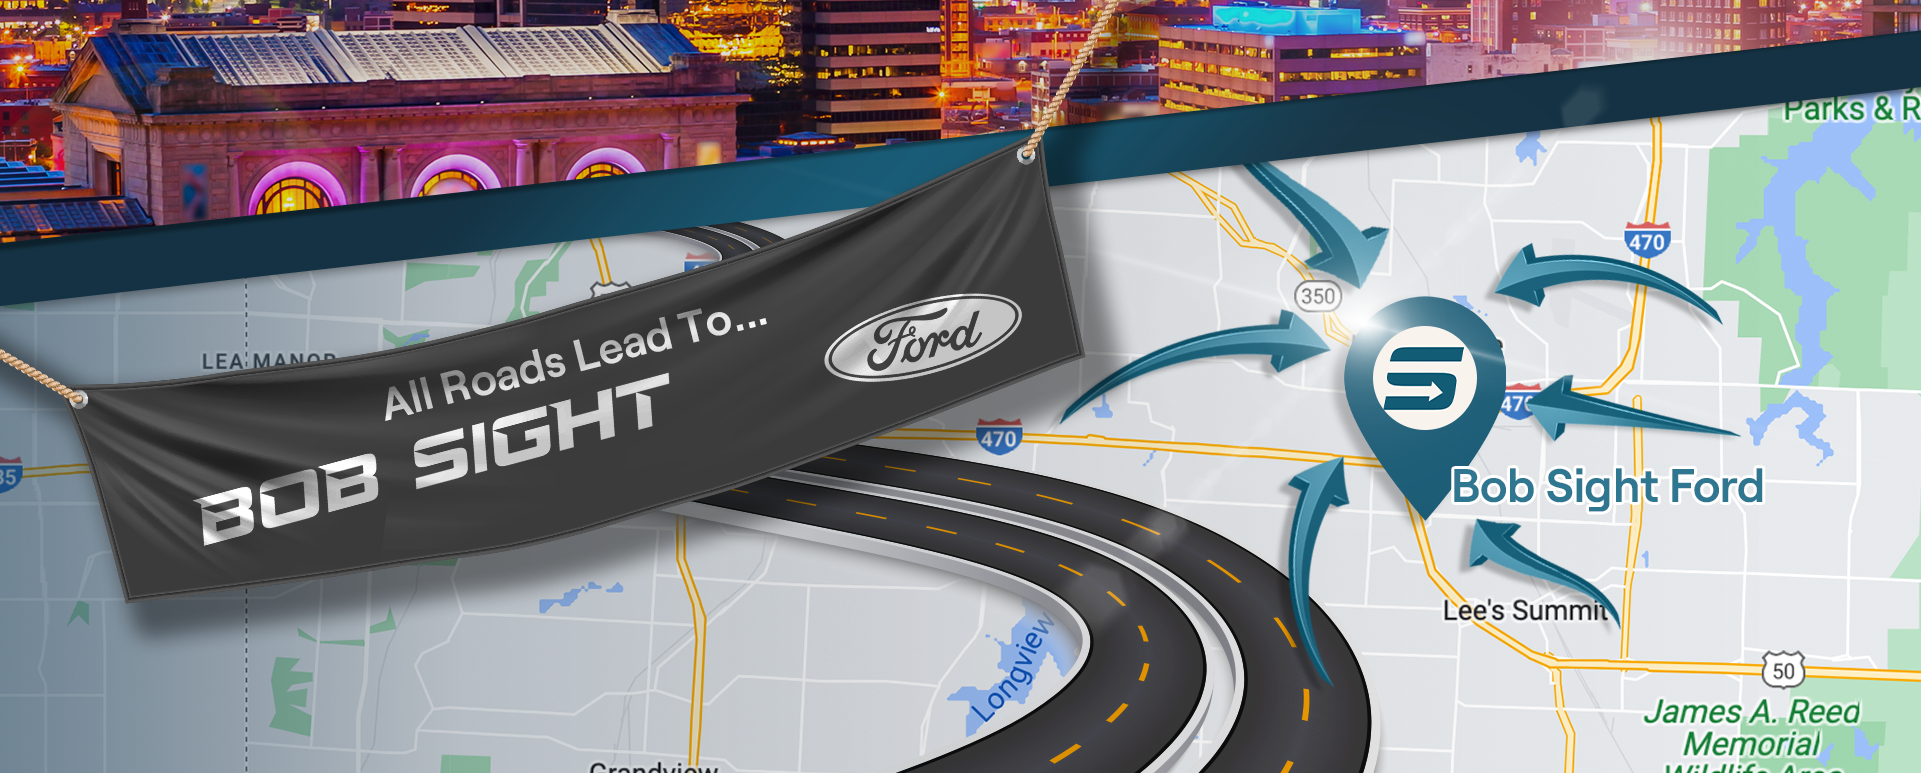 All Roads Lead to Bob Sight Ford in Kansas City